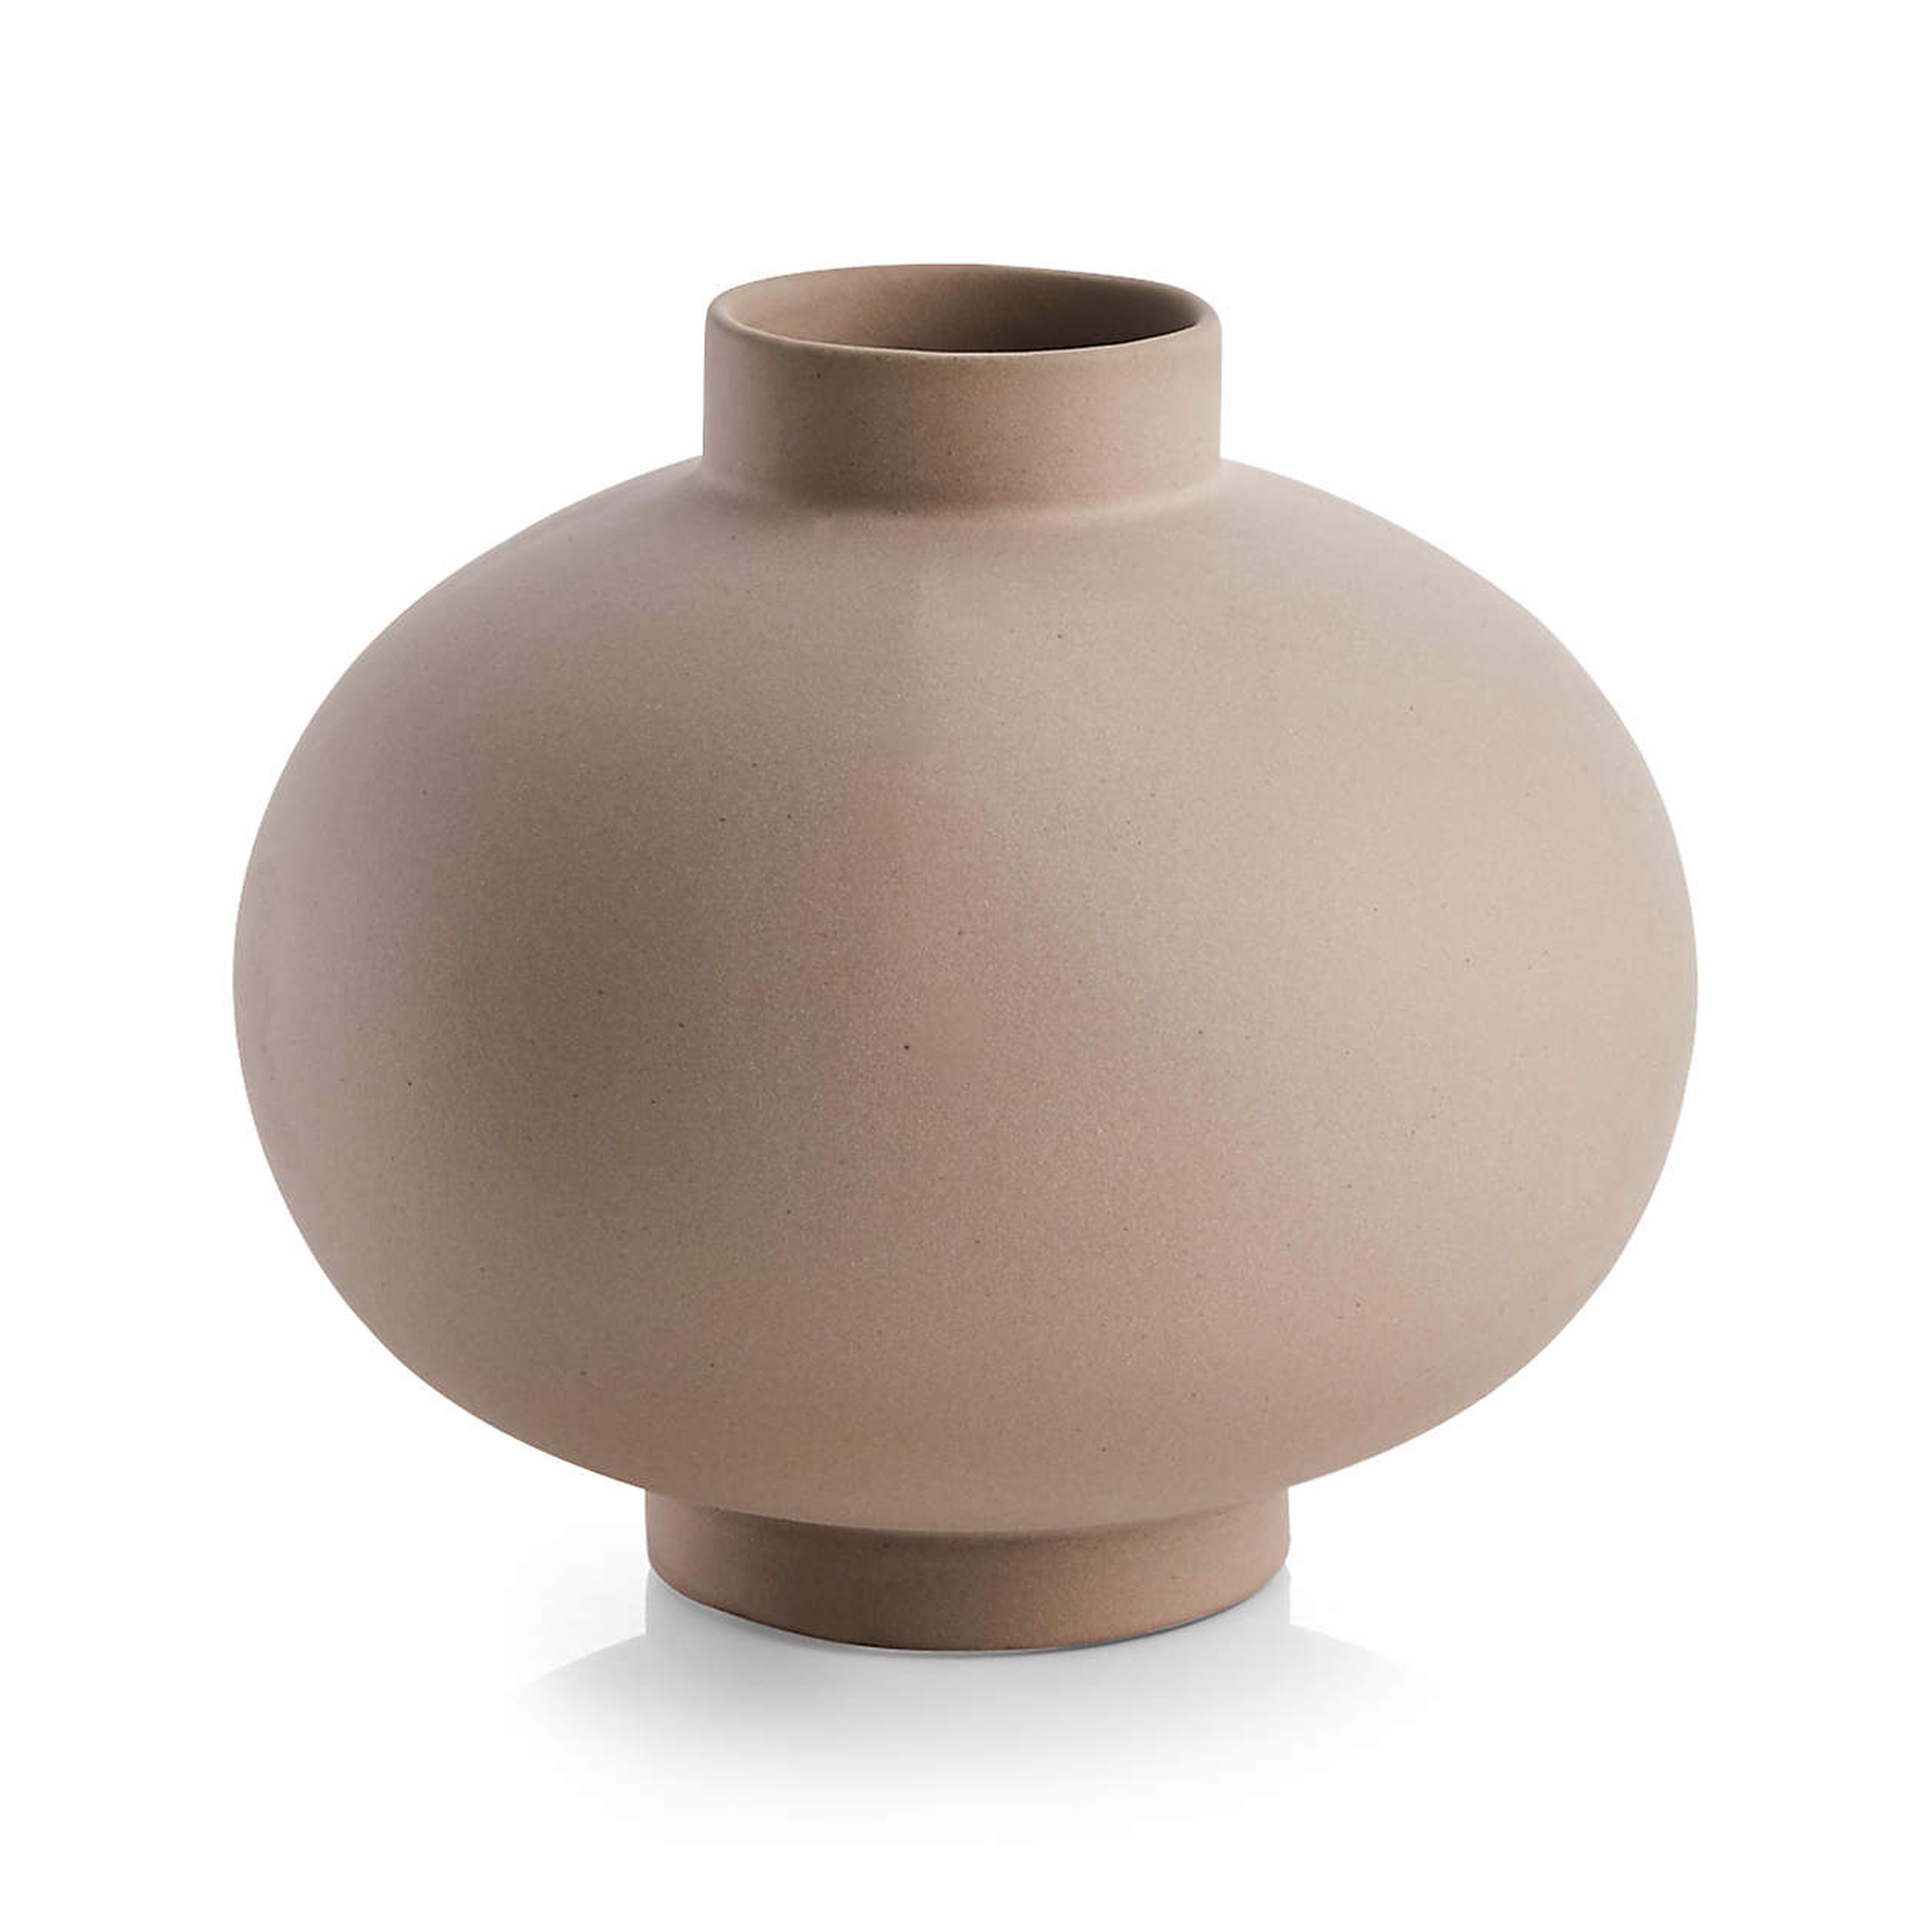 Full Moon Clay Vase by Leanne Ford - Crate and Barrel